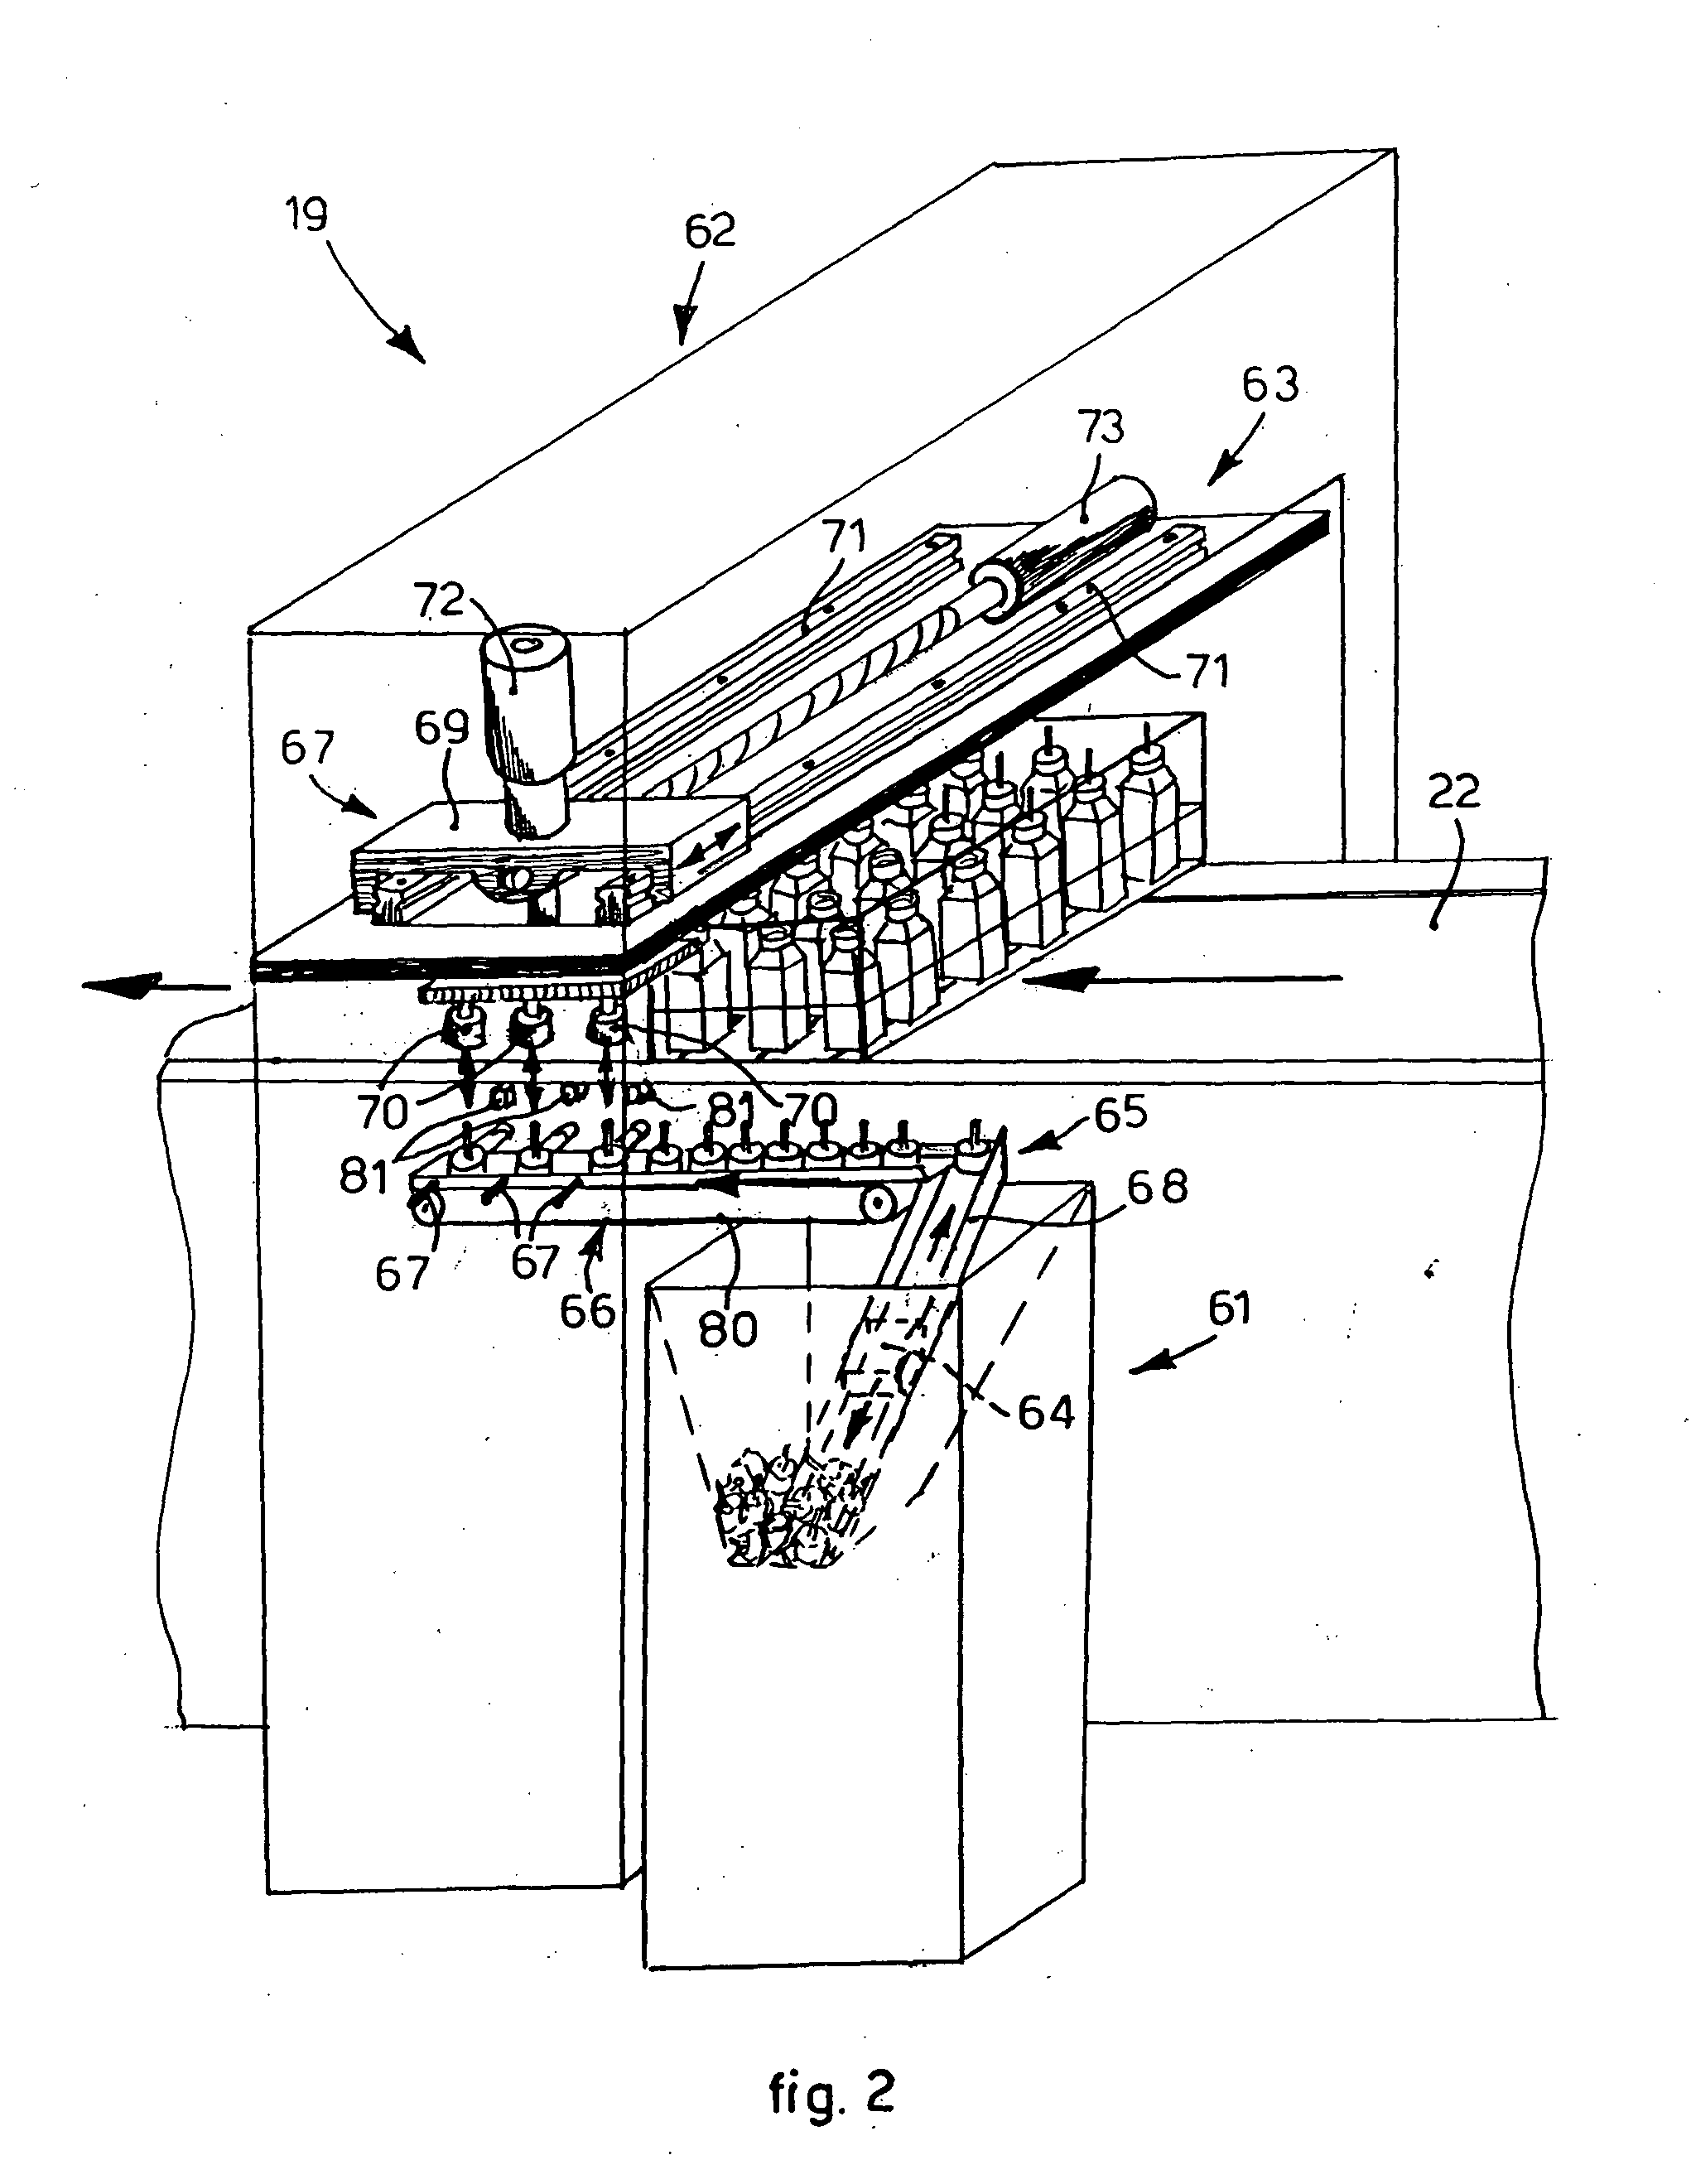 Machine and method for treating containers of liquids, and loading device for said containers